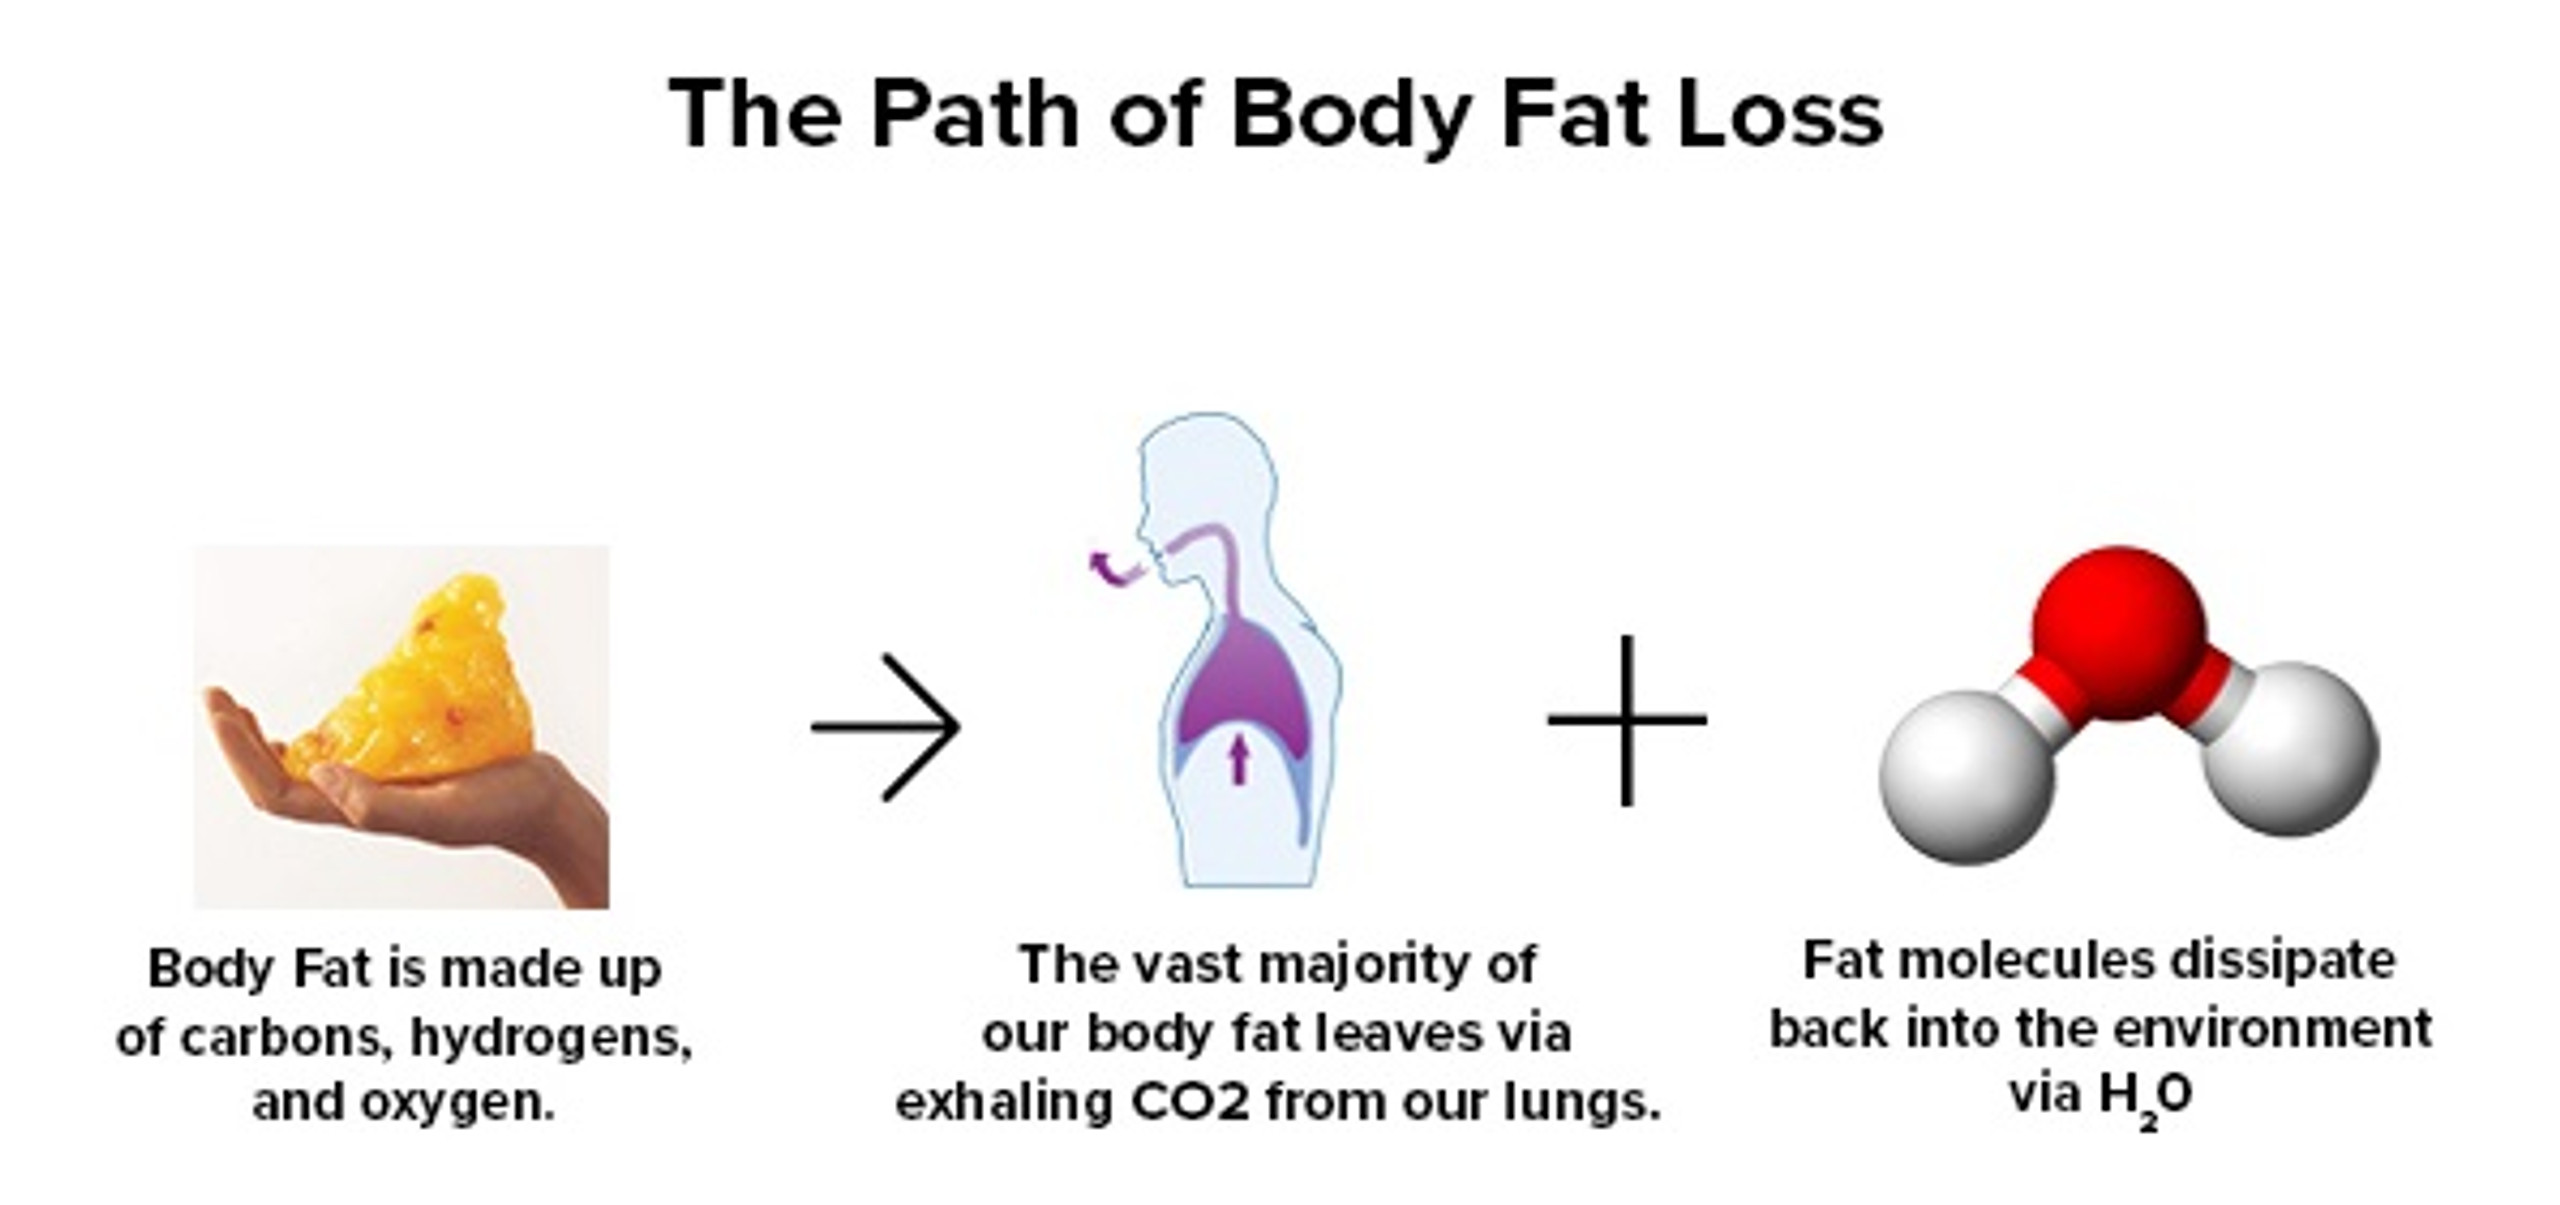 How Do We Actually Lose Body Fat?